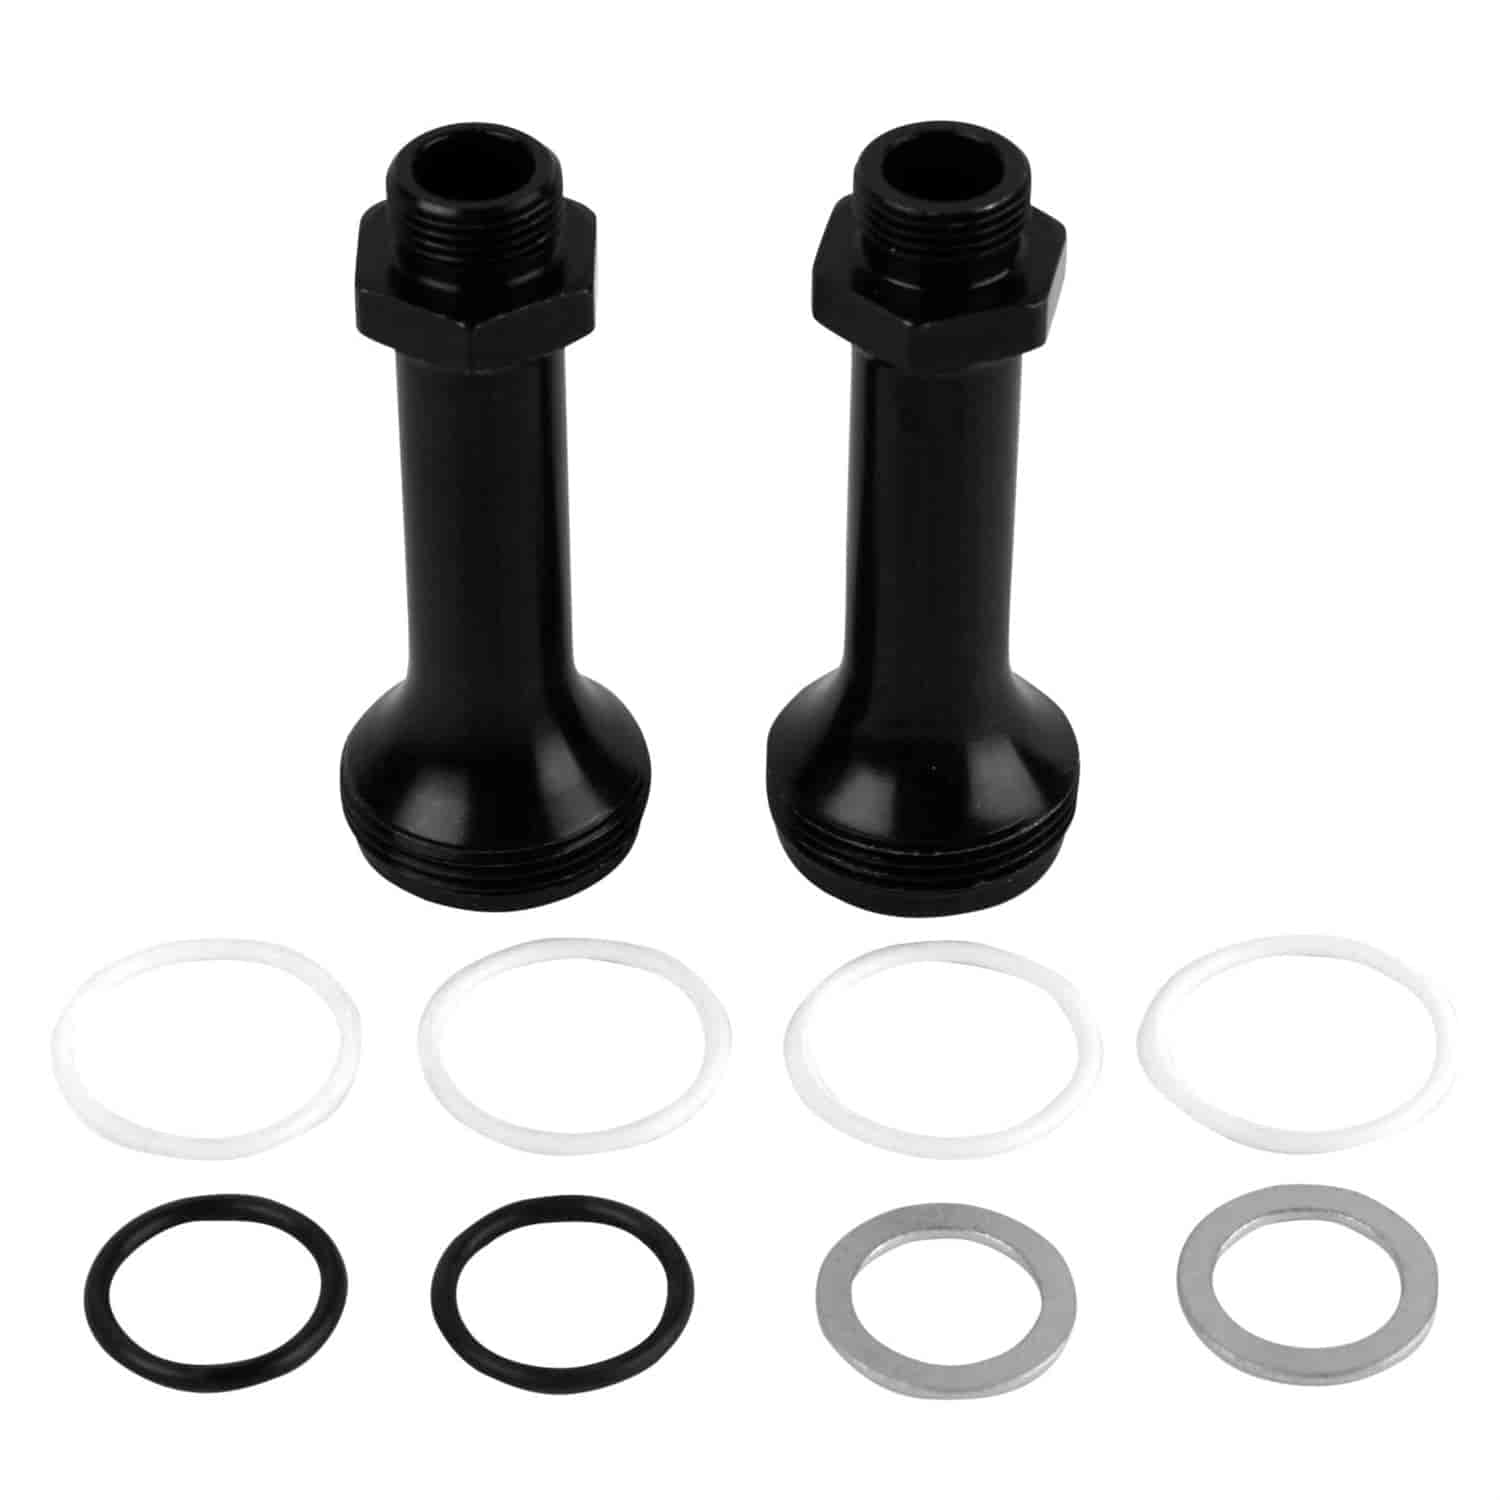 Fuel Log Coversion Kit Coverts Holley 4150/4500 to Demon